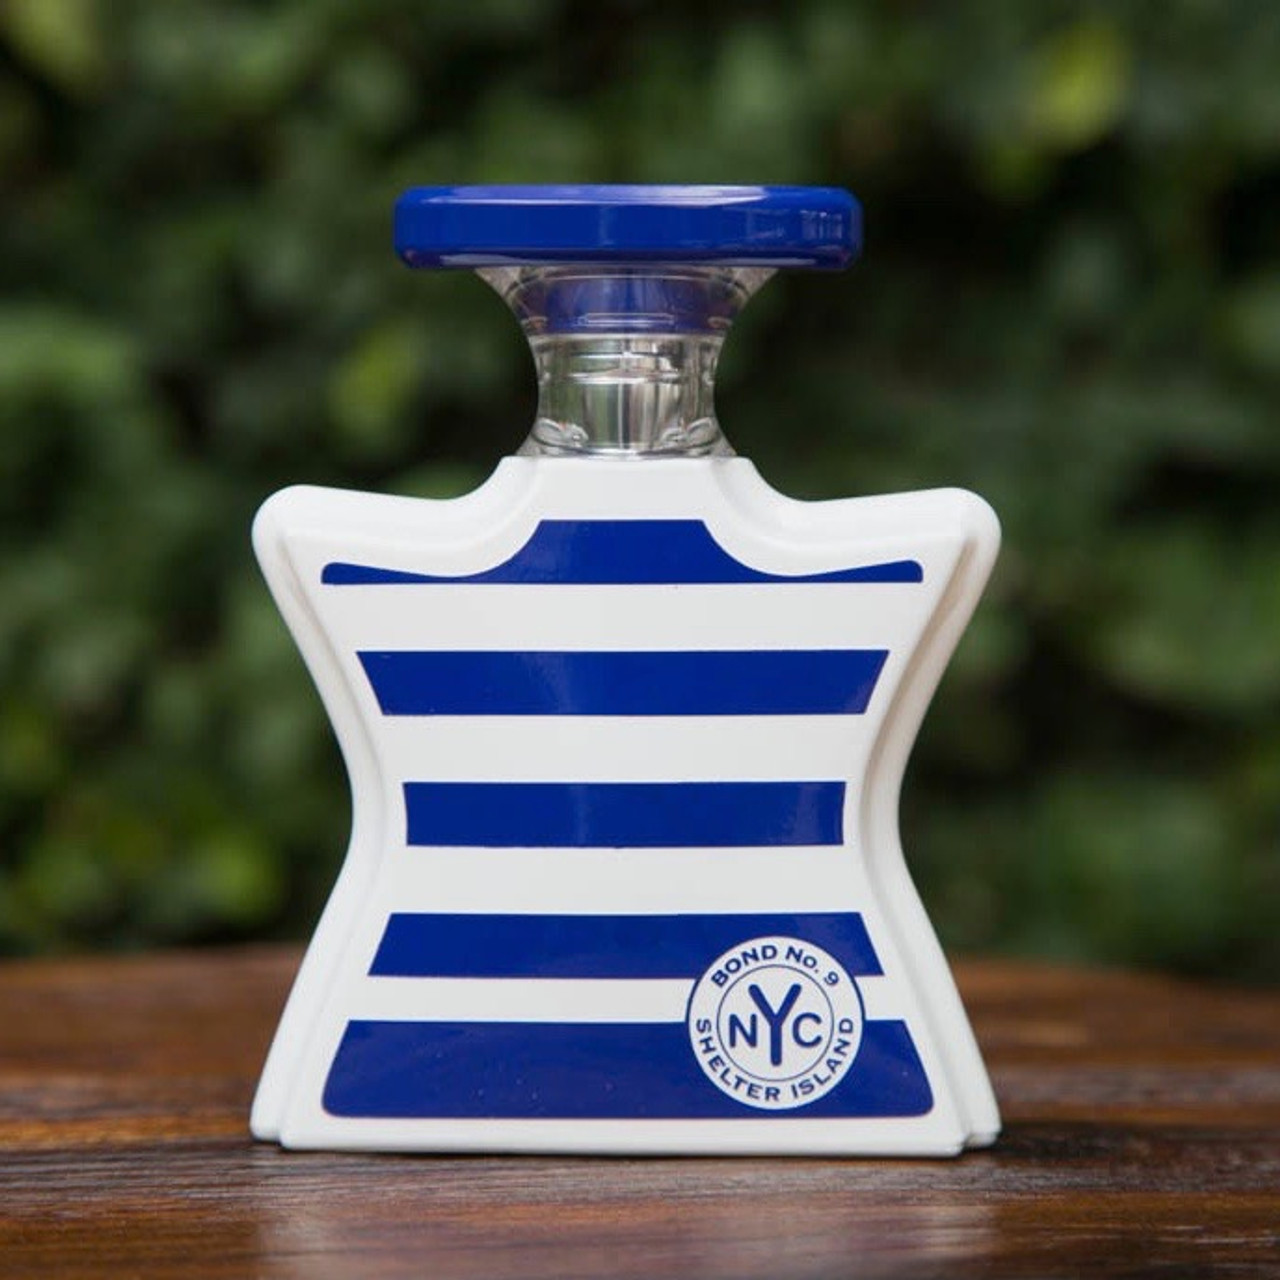 Bond No. 9 Shelter Island Fragrance | Hearth and Soul